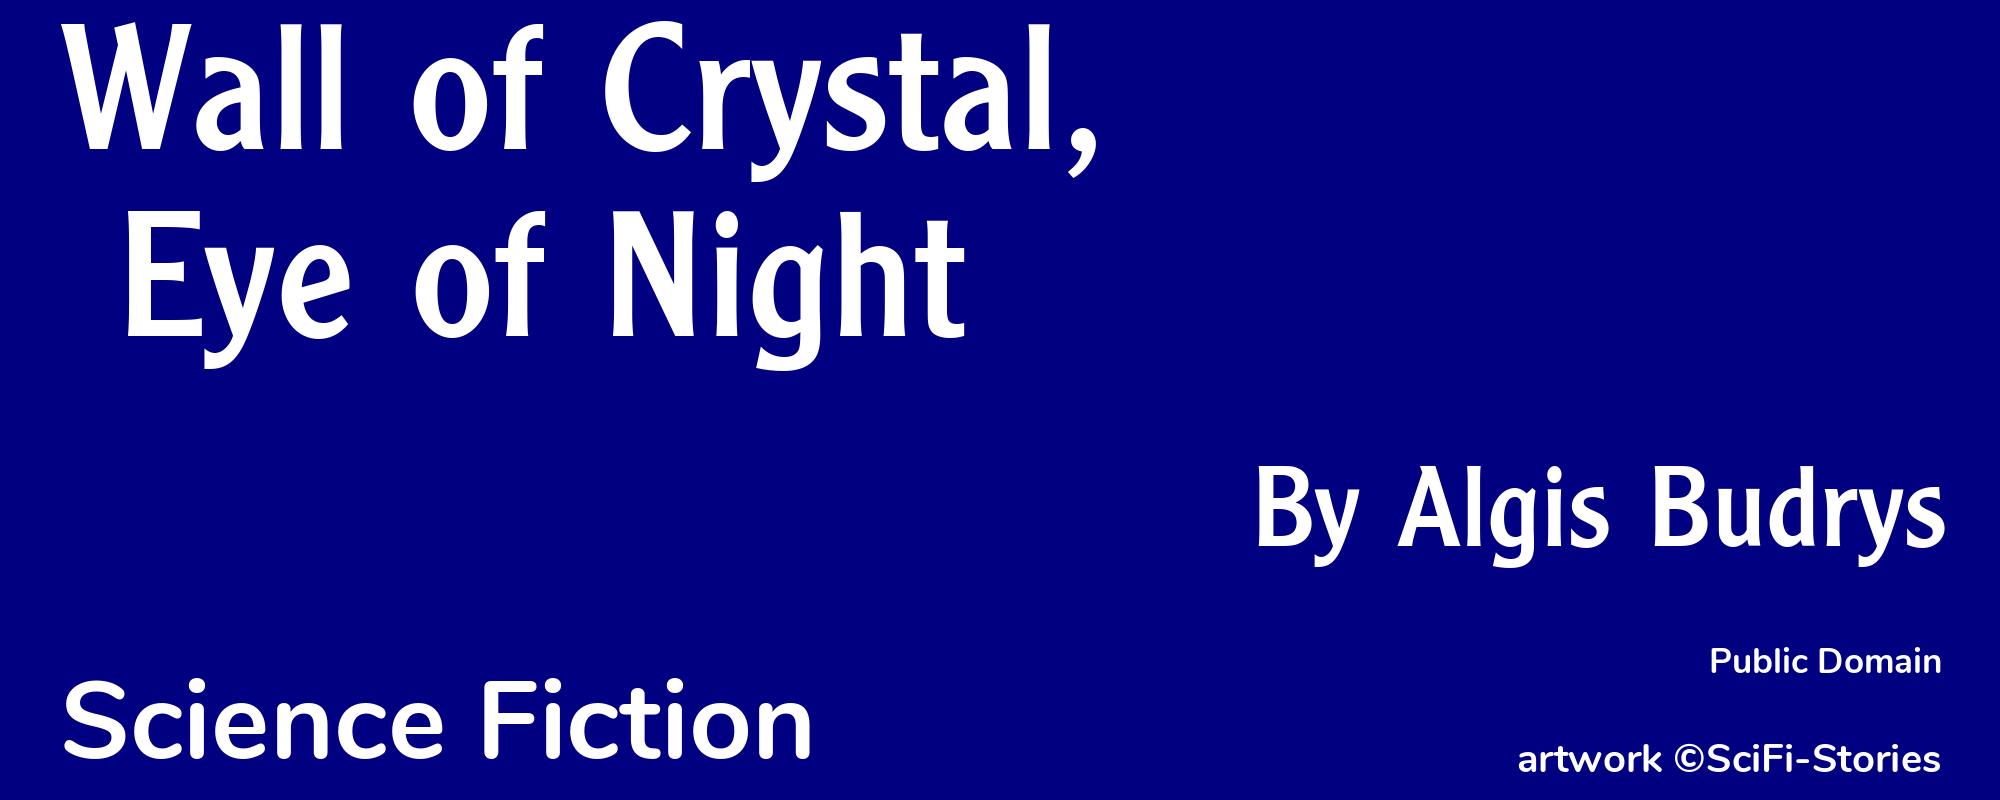 Wall of Crystal, Eye of Night - Cover